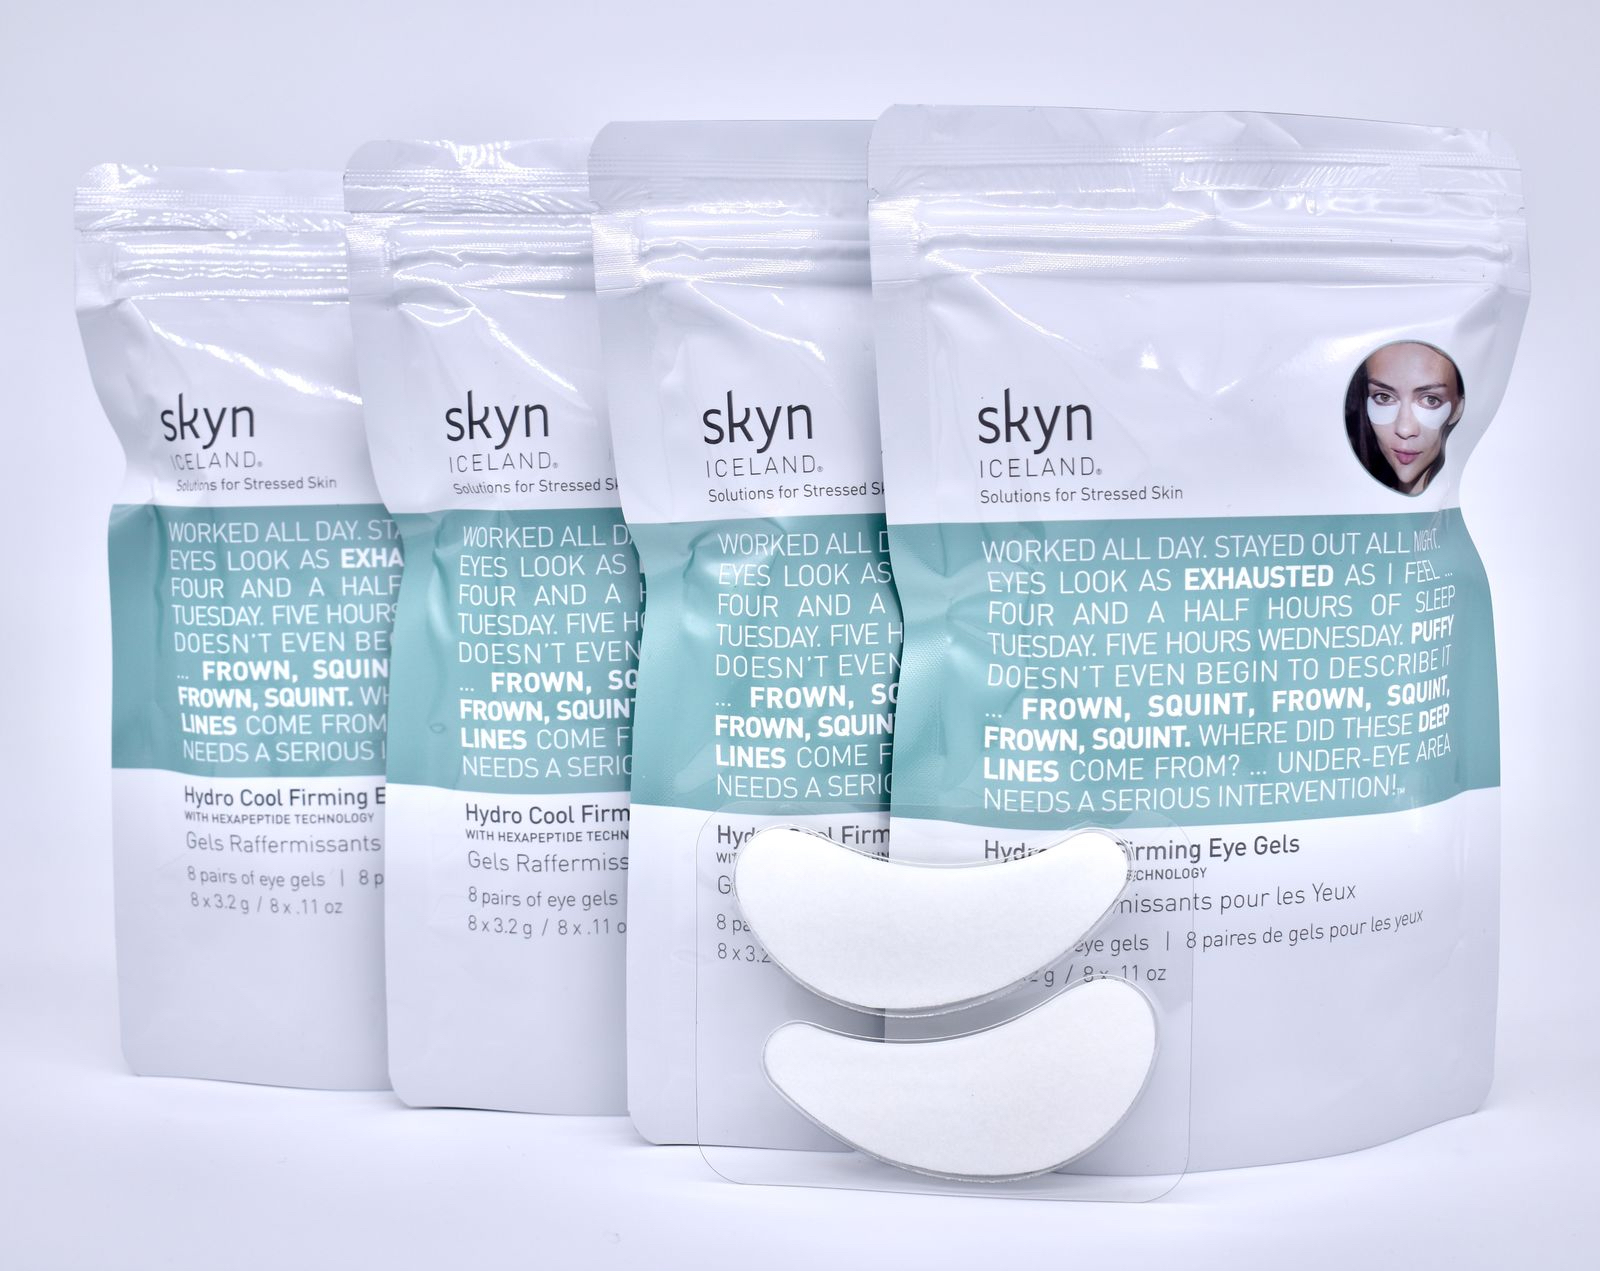 Skyn Iceland generates roughly $10 million in sales. Under new ownership, the brand’s growth strategy is designed to increase its turnover to $30 million in sales in three to four years.